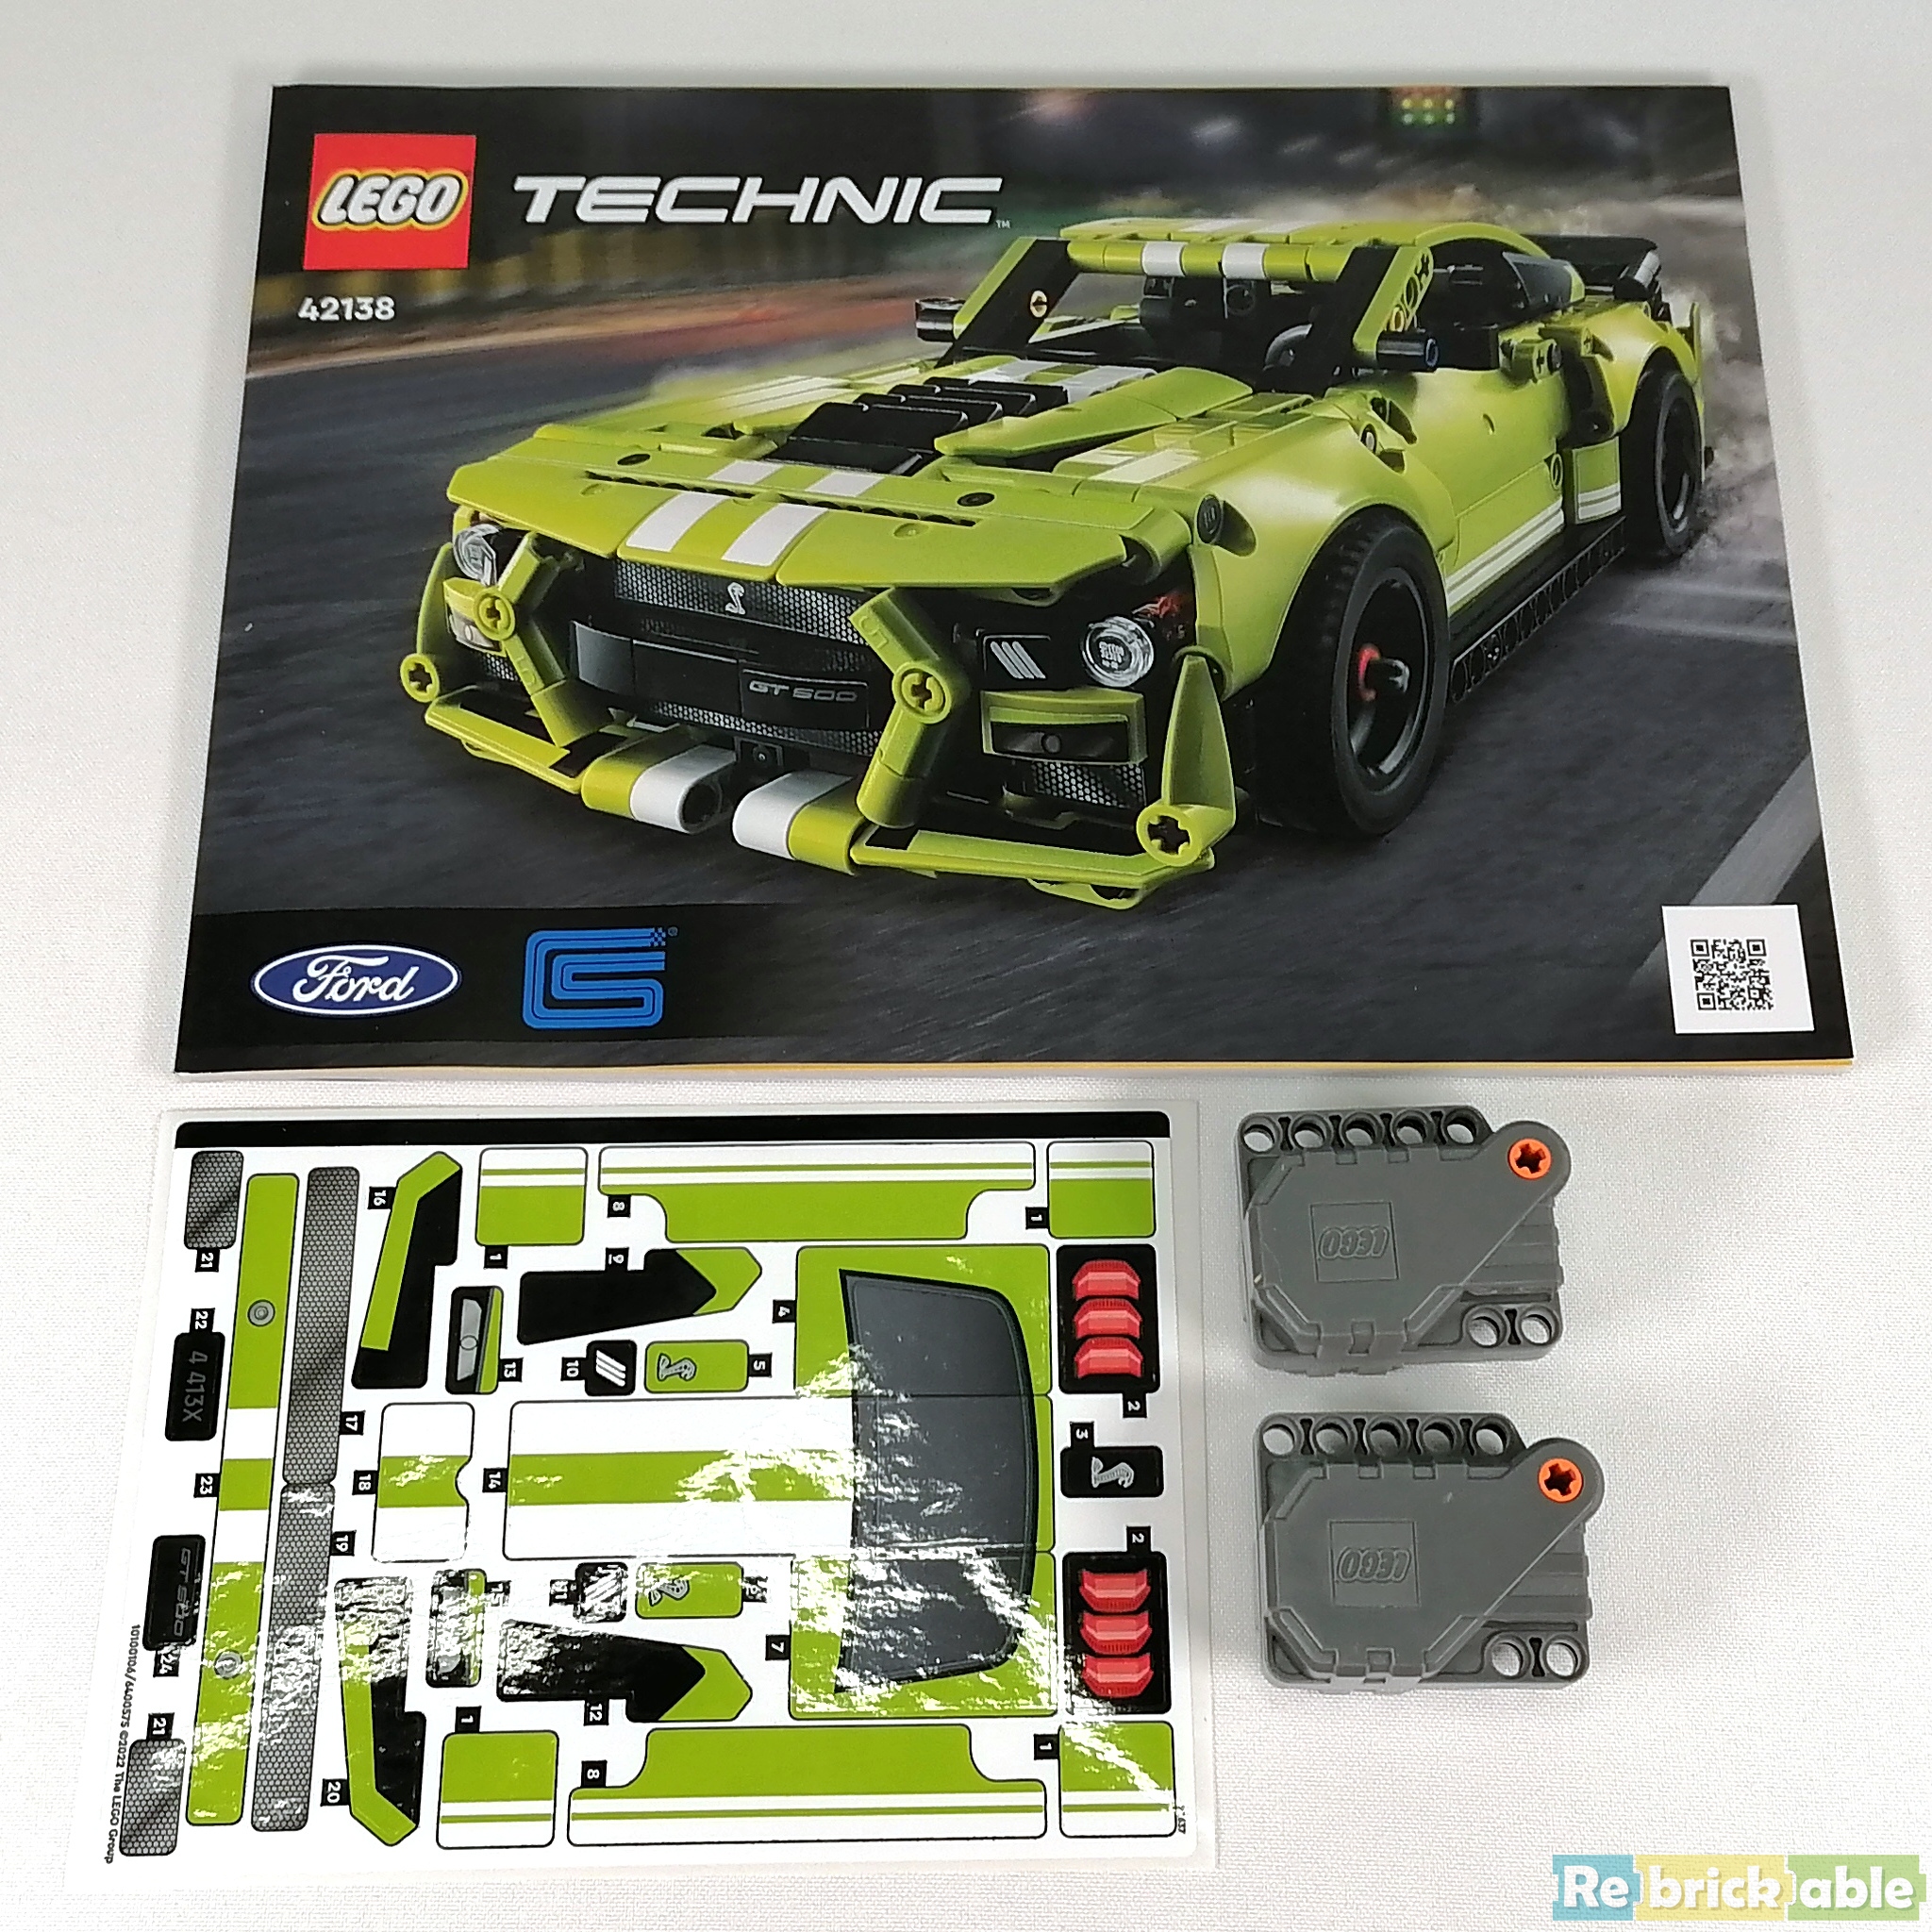 Lego noob builds his first Technic set  (42138) Ford Mustang Shelby GT500  review